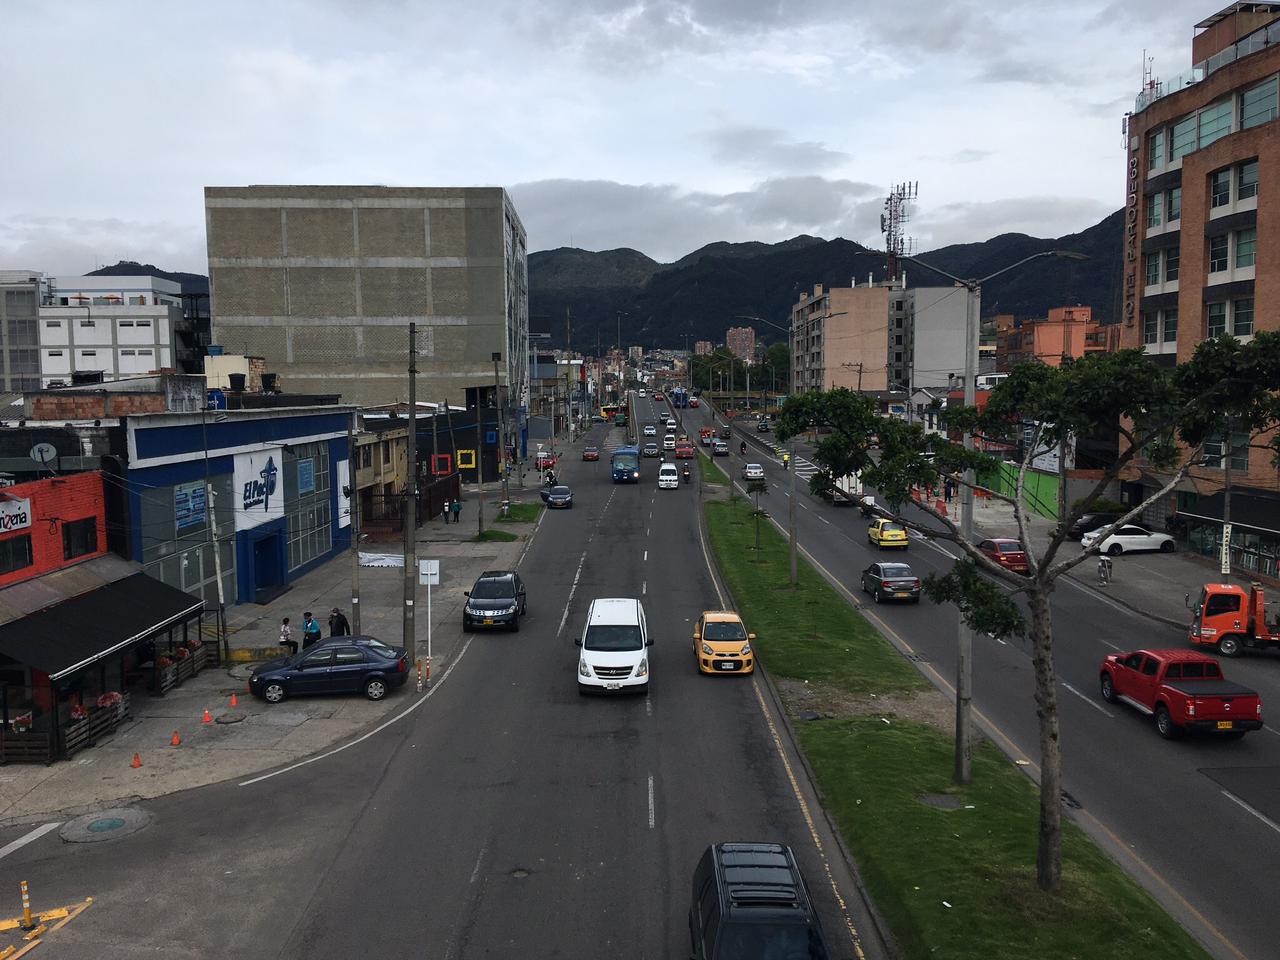 Bogotá May restrictions: No quarantine this weekend